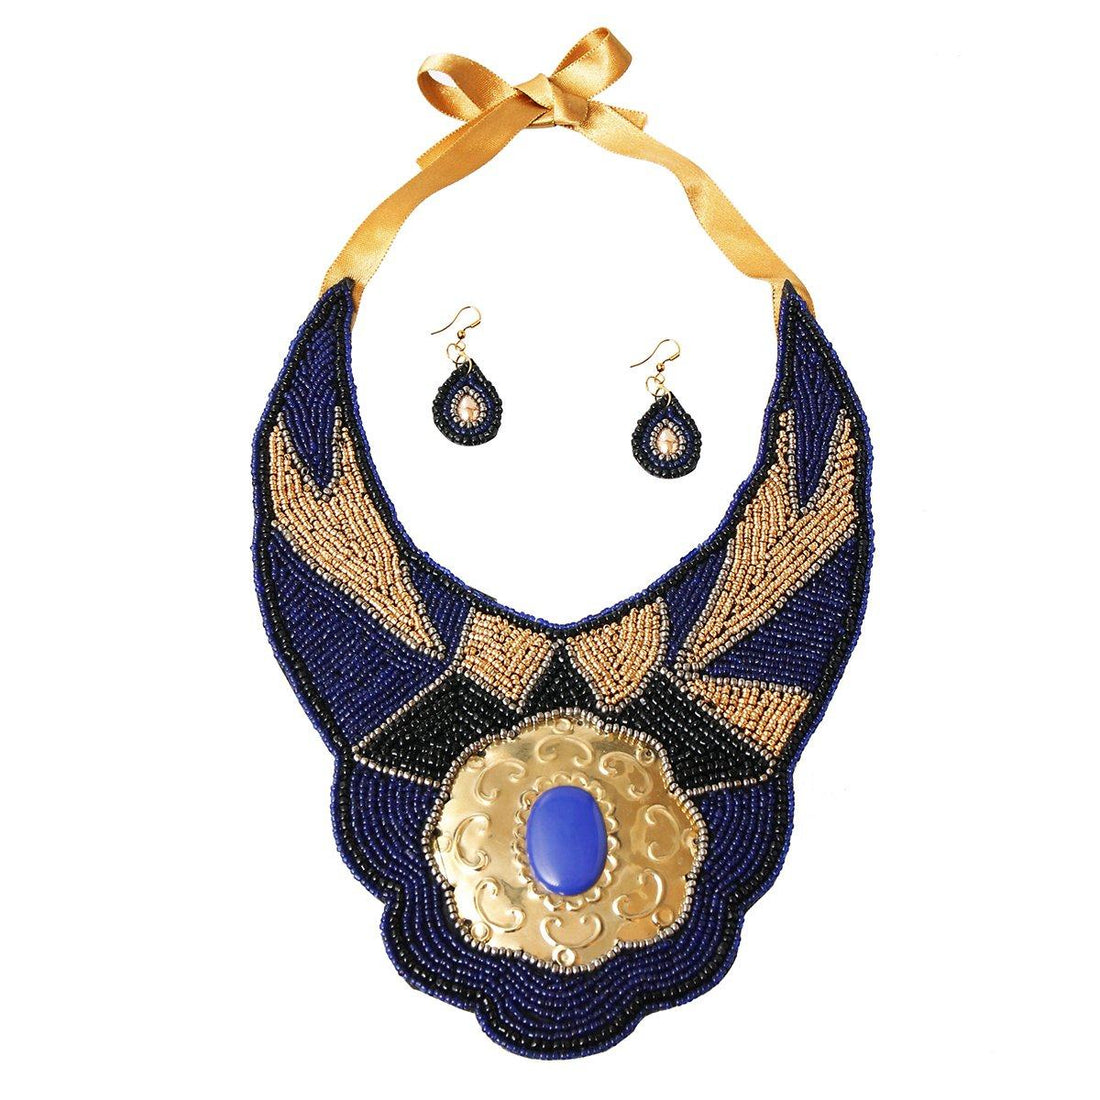 Blue and Gold Beaded Bib Necklace Set Featuring Stamped Metal Plate Design